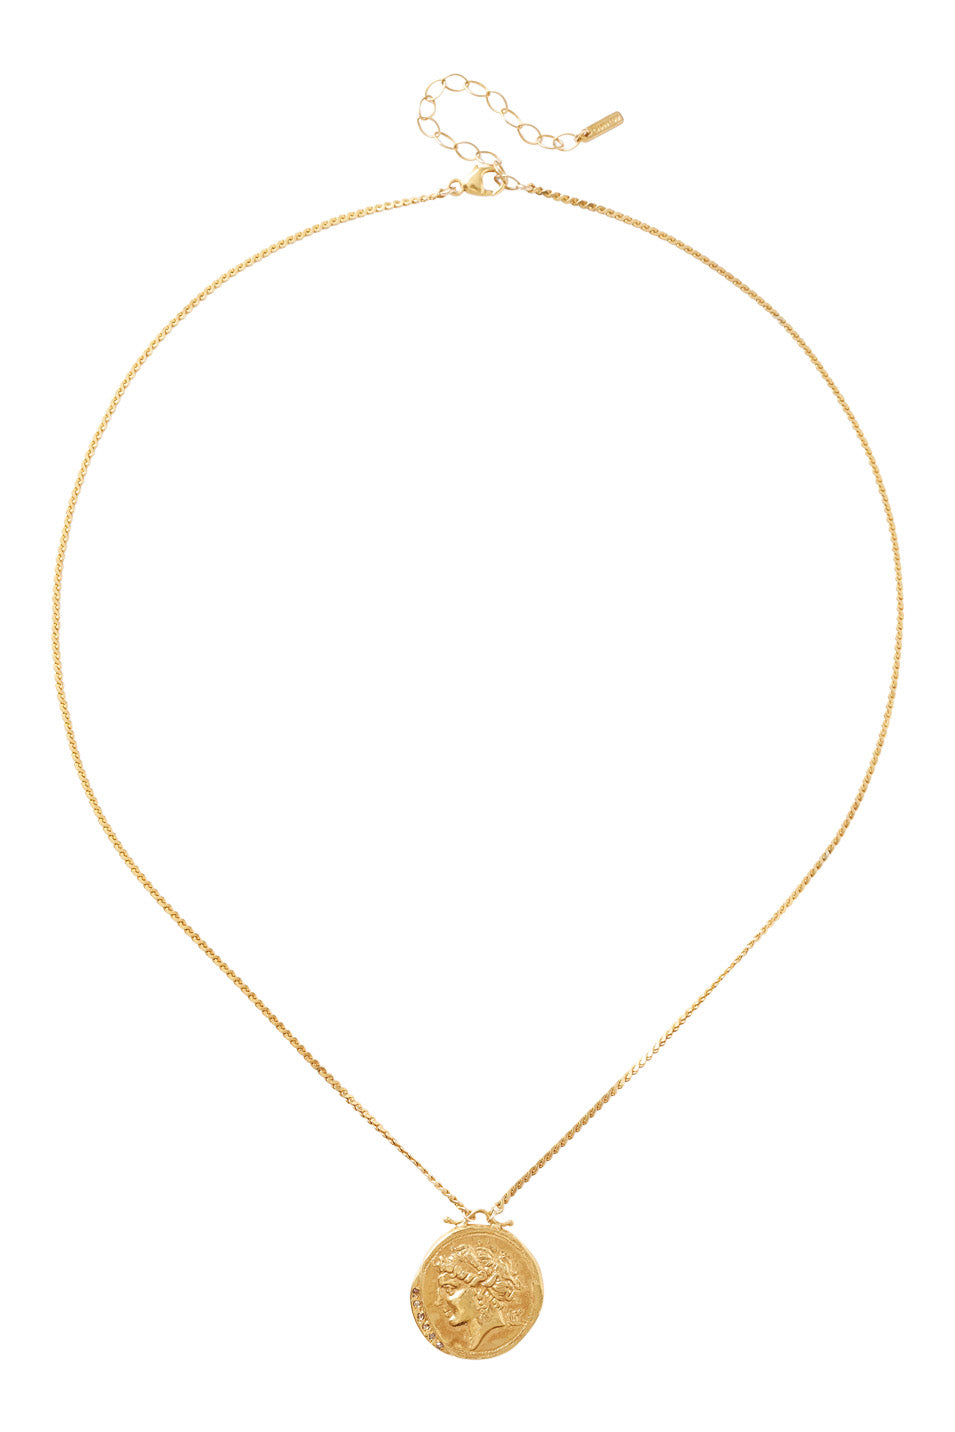 Chan Luu Hypatia Pendant Necklace in Yellow Gold